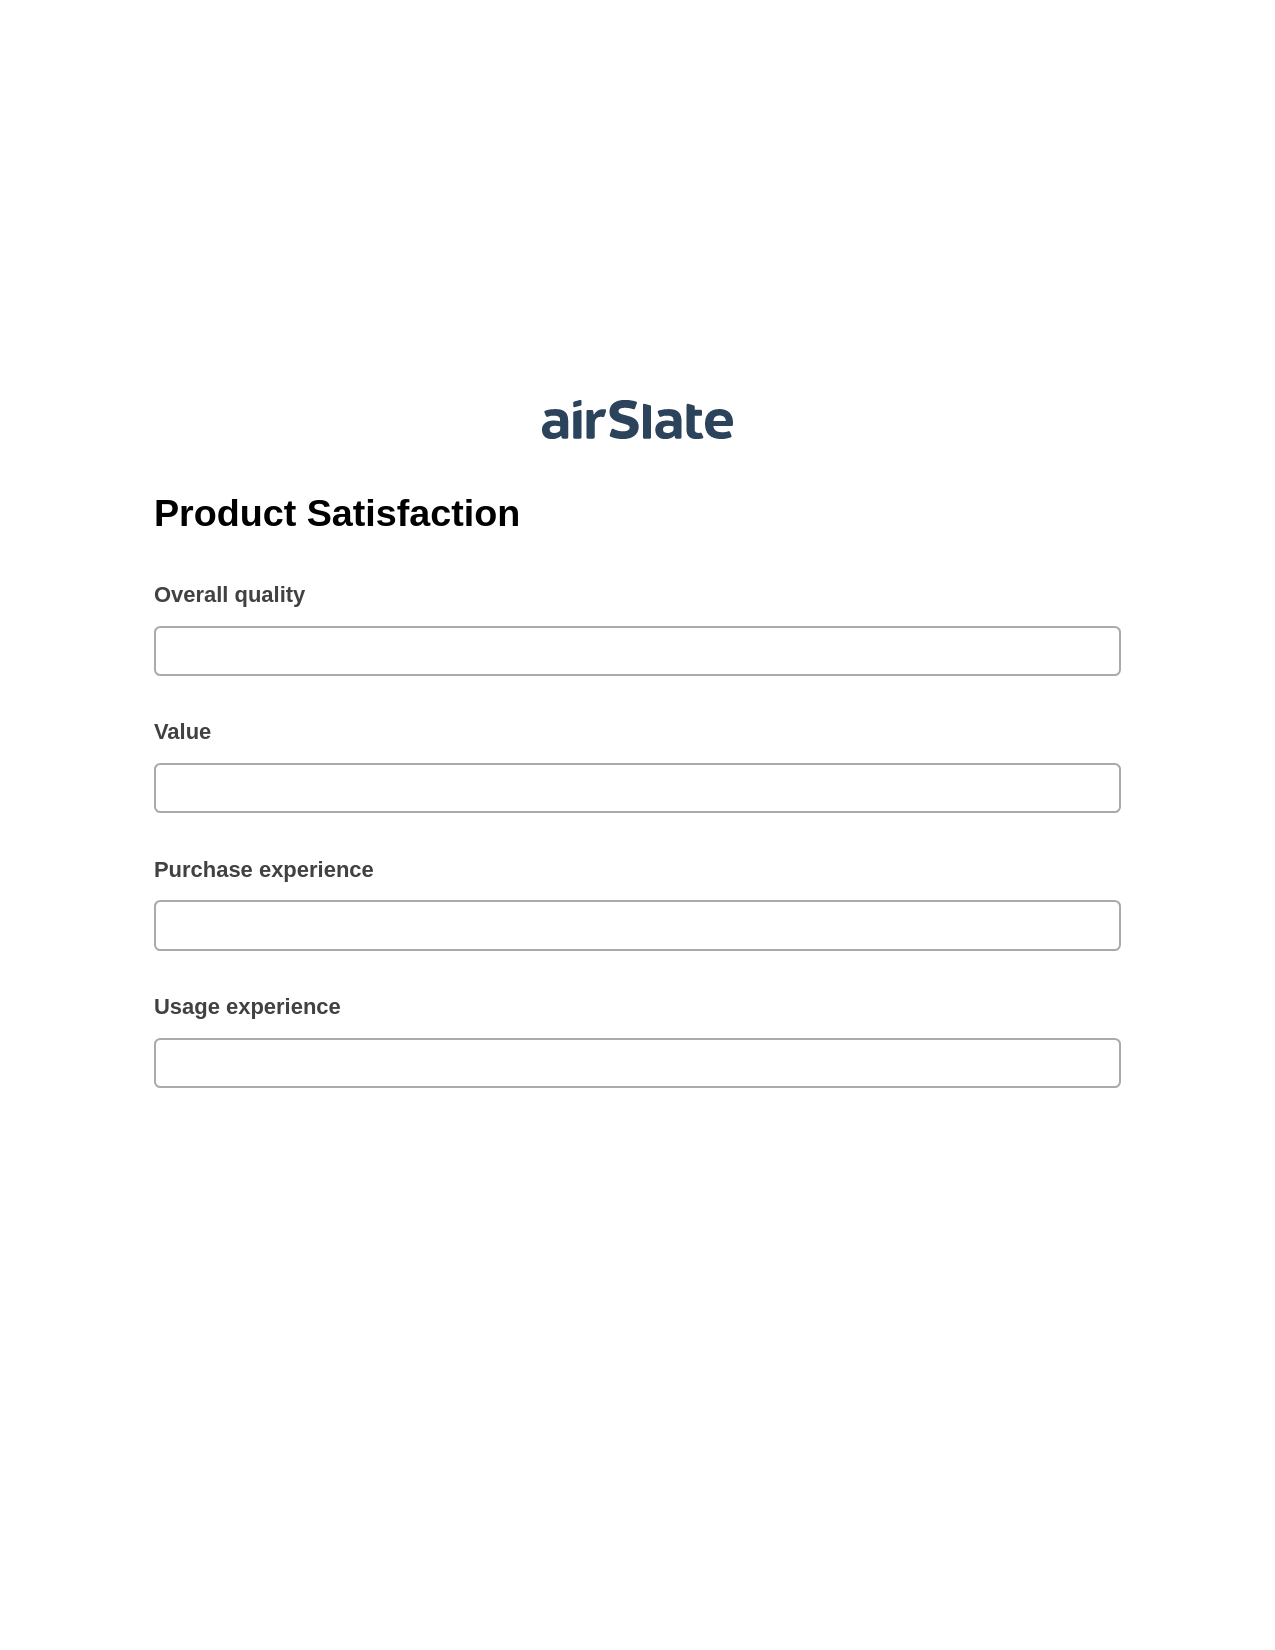 Product Satisfaction Pre-fill from another Slate Bot, Export to MS Dynamics 365 Bot, Export to Excel 365 Bot